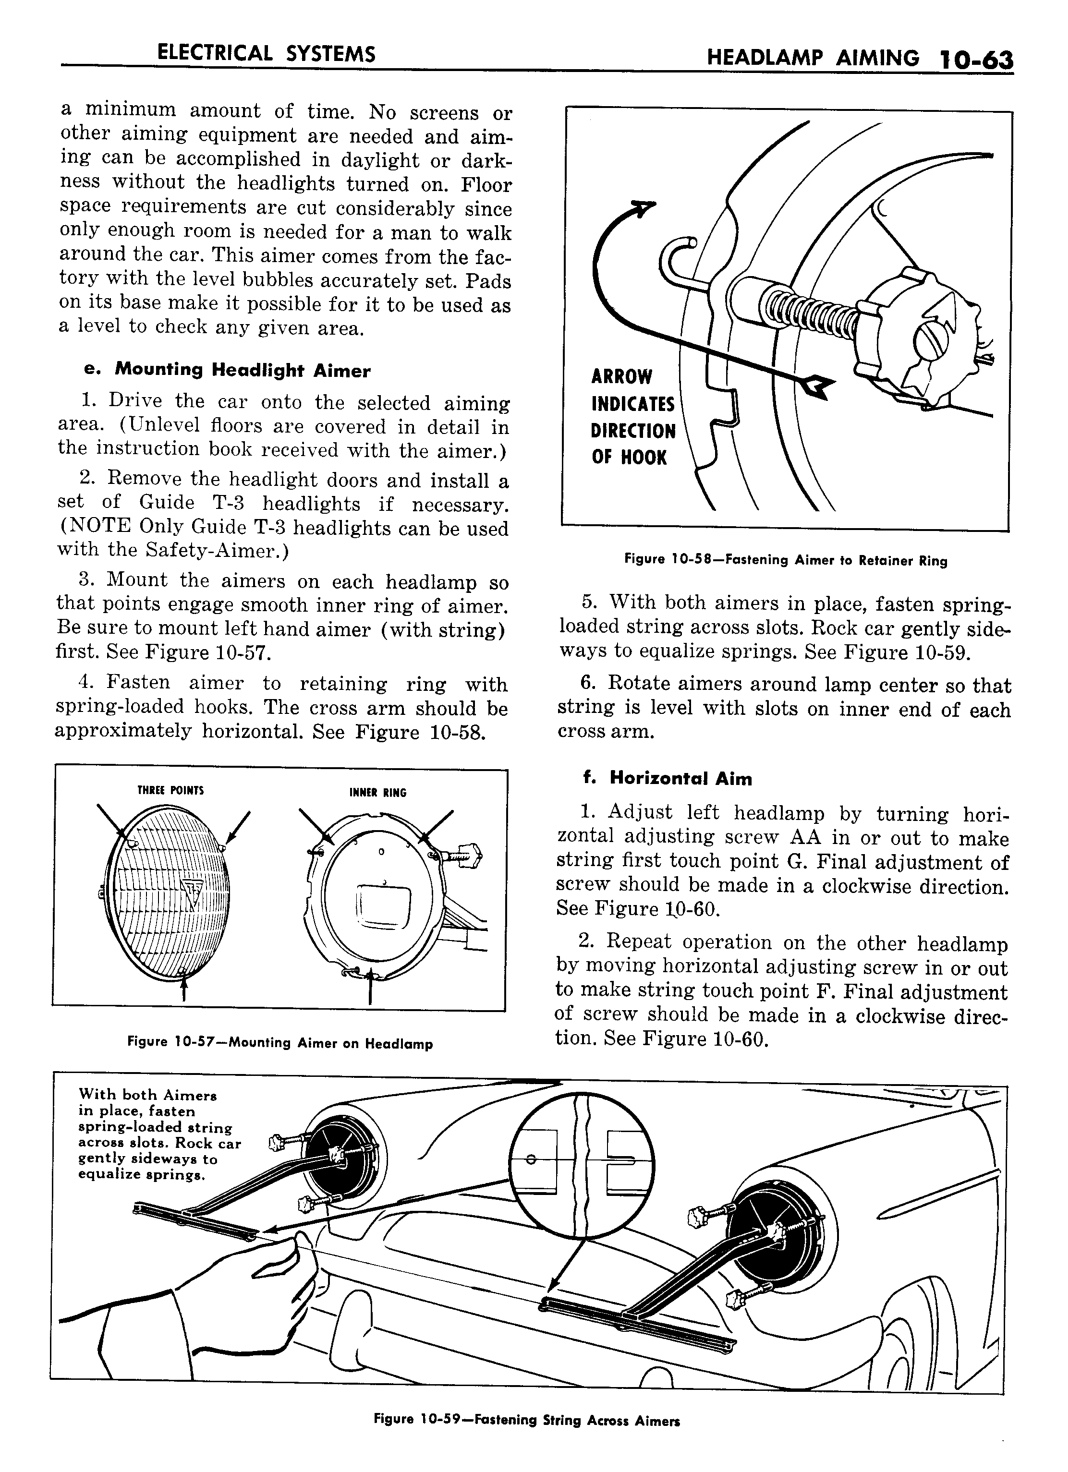 n_11 1957 Buick Shop Manual - Electrical Systems-063-063.jpg